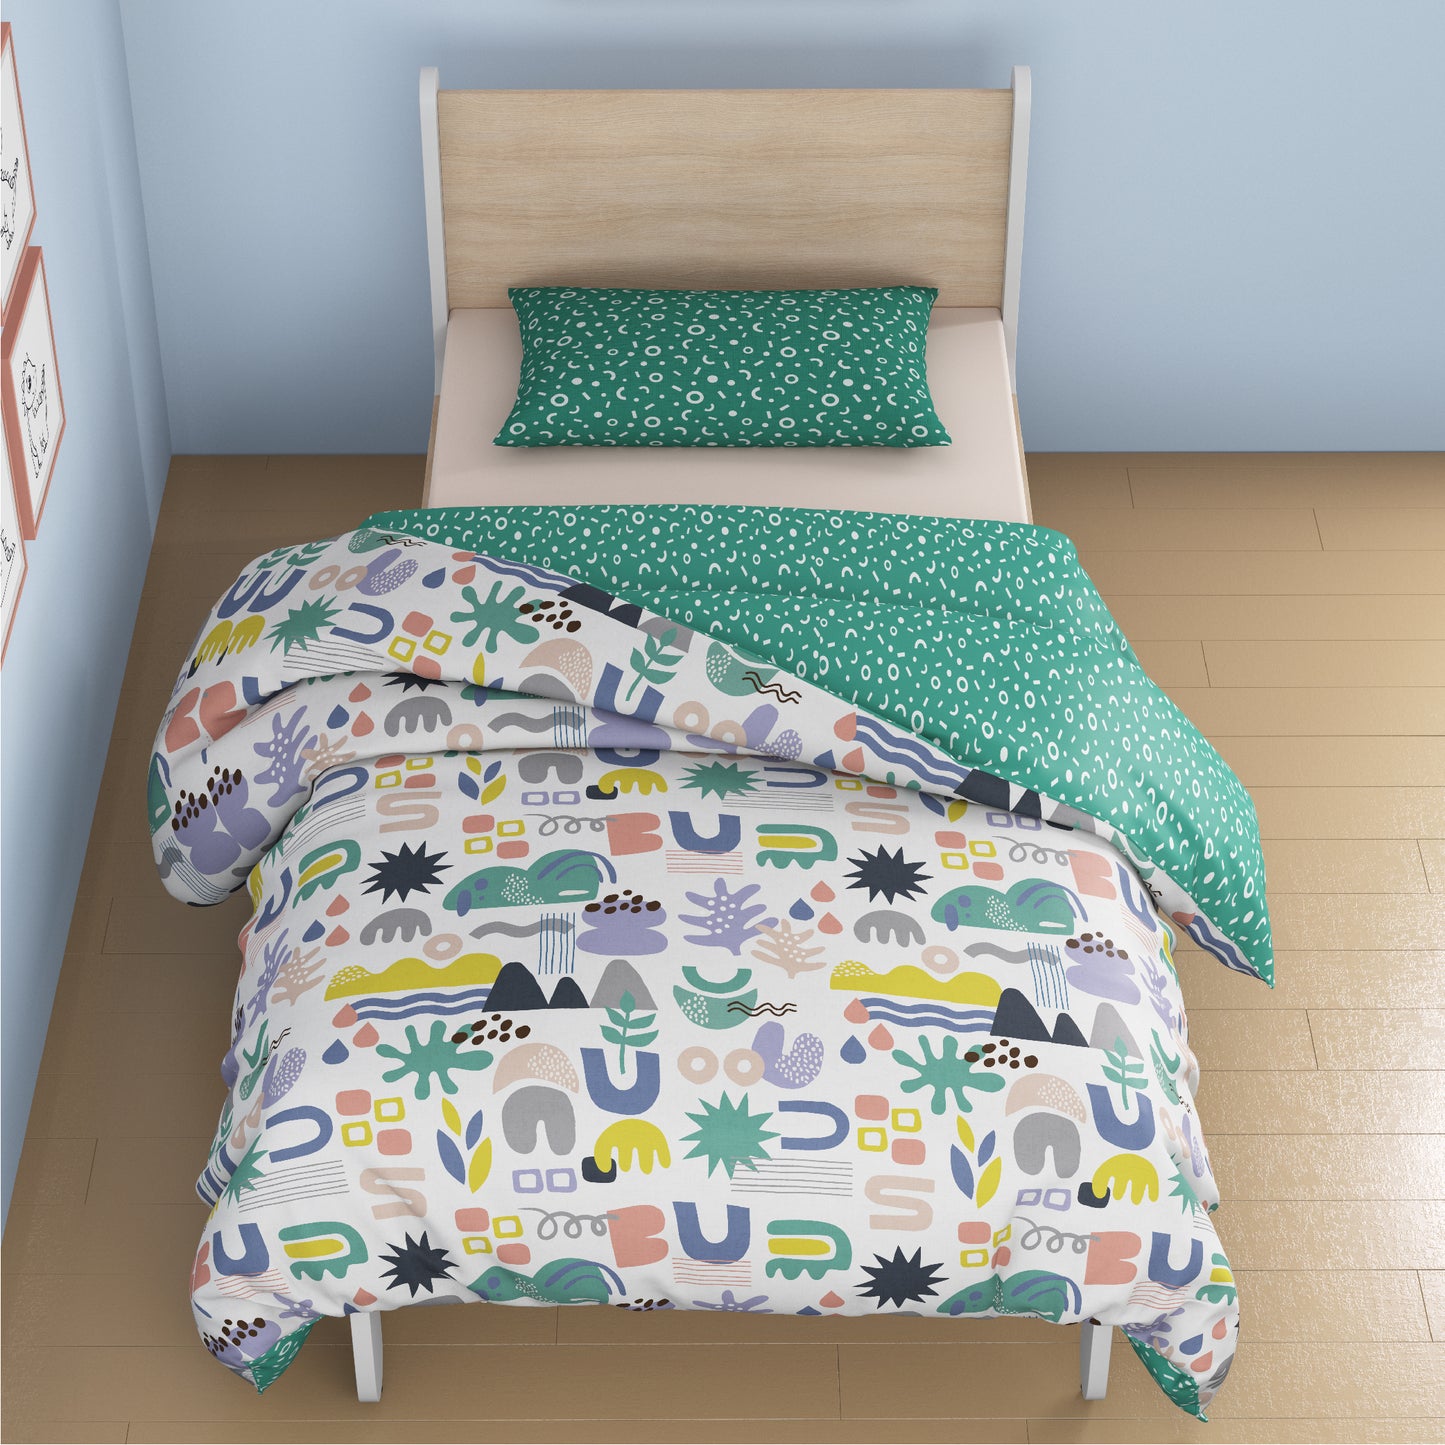 Oodles of Doodles Reversible Winter Comforter Single Bed Size